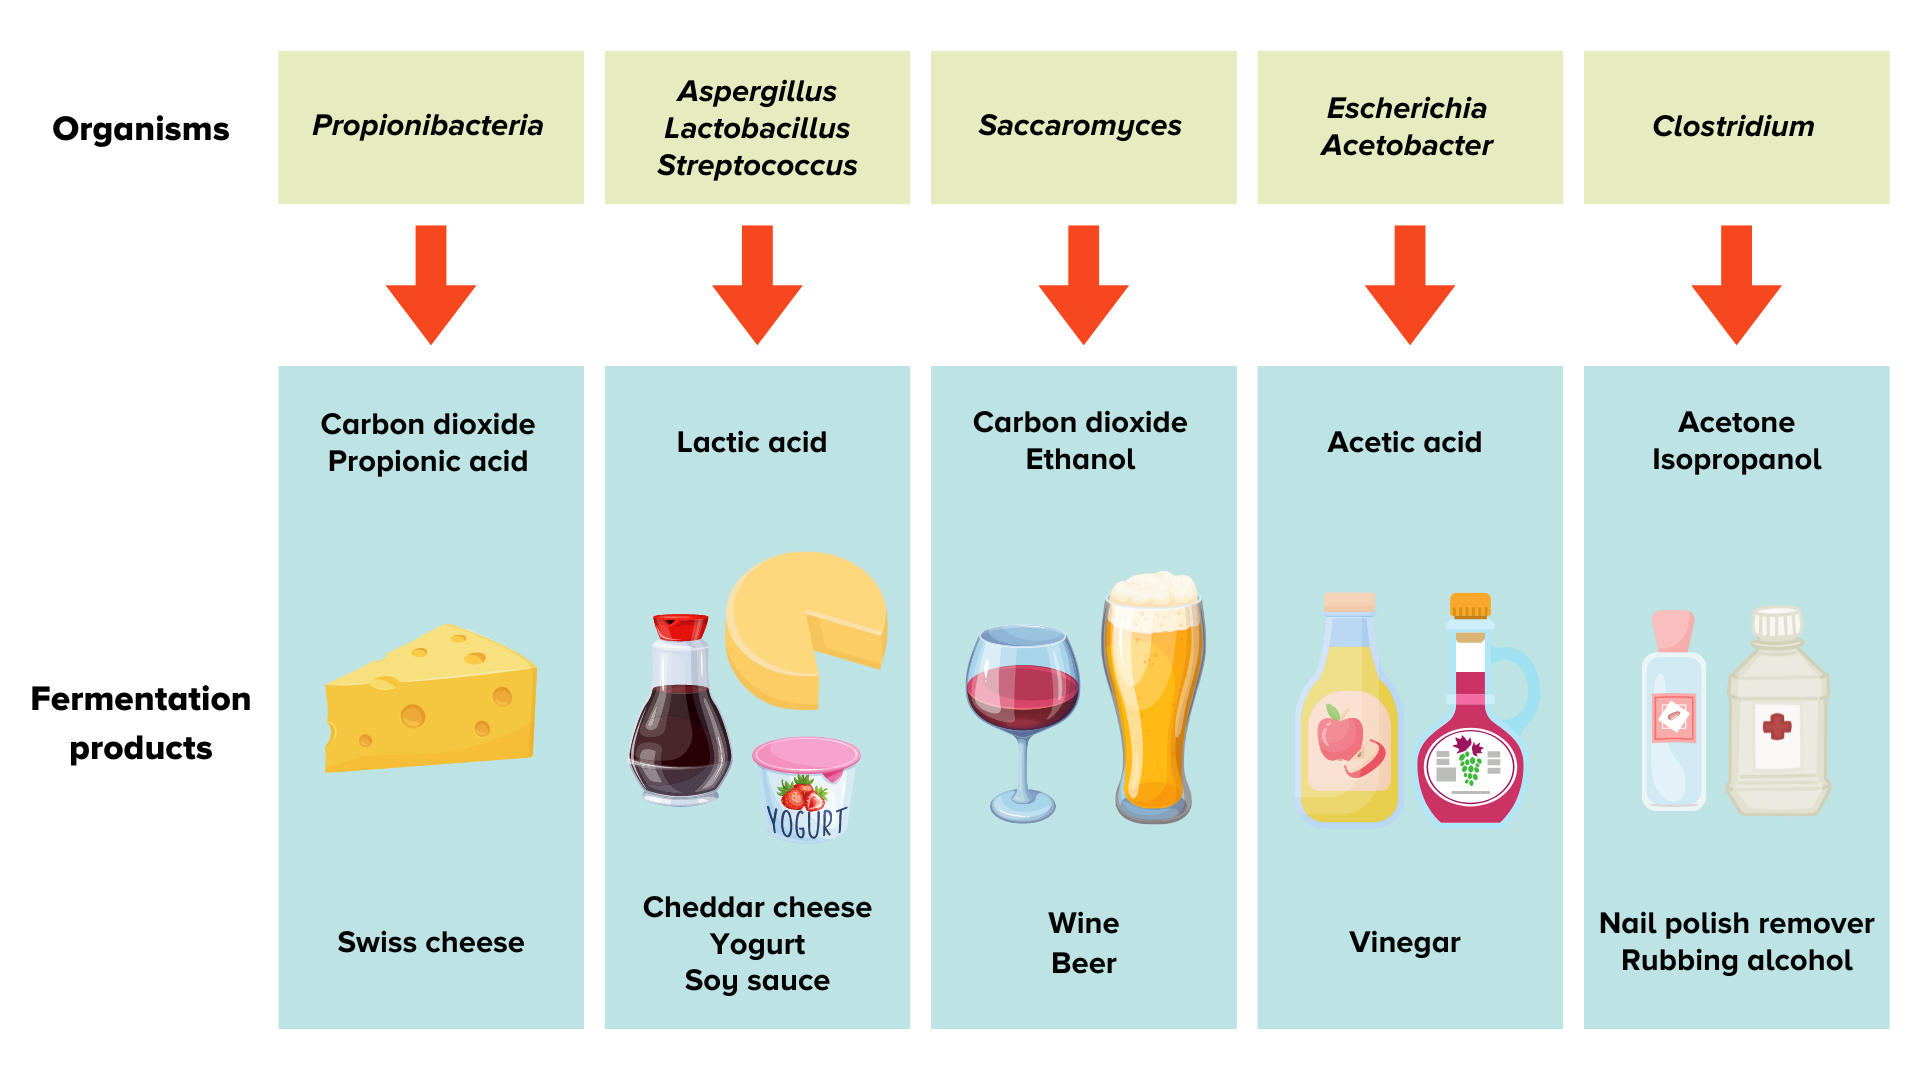 A table shows a flow from organisms such as Lactobacillus, aspergillus, and streptococcus to the fermentation product such as lactic acid shown with images of cheddar cheese, yogurt and soy sauce.